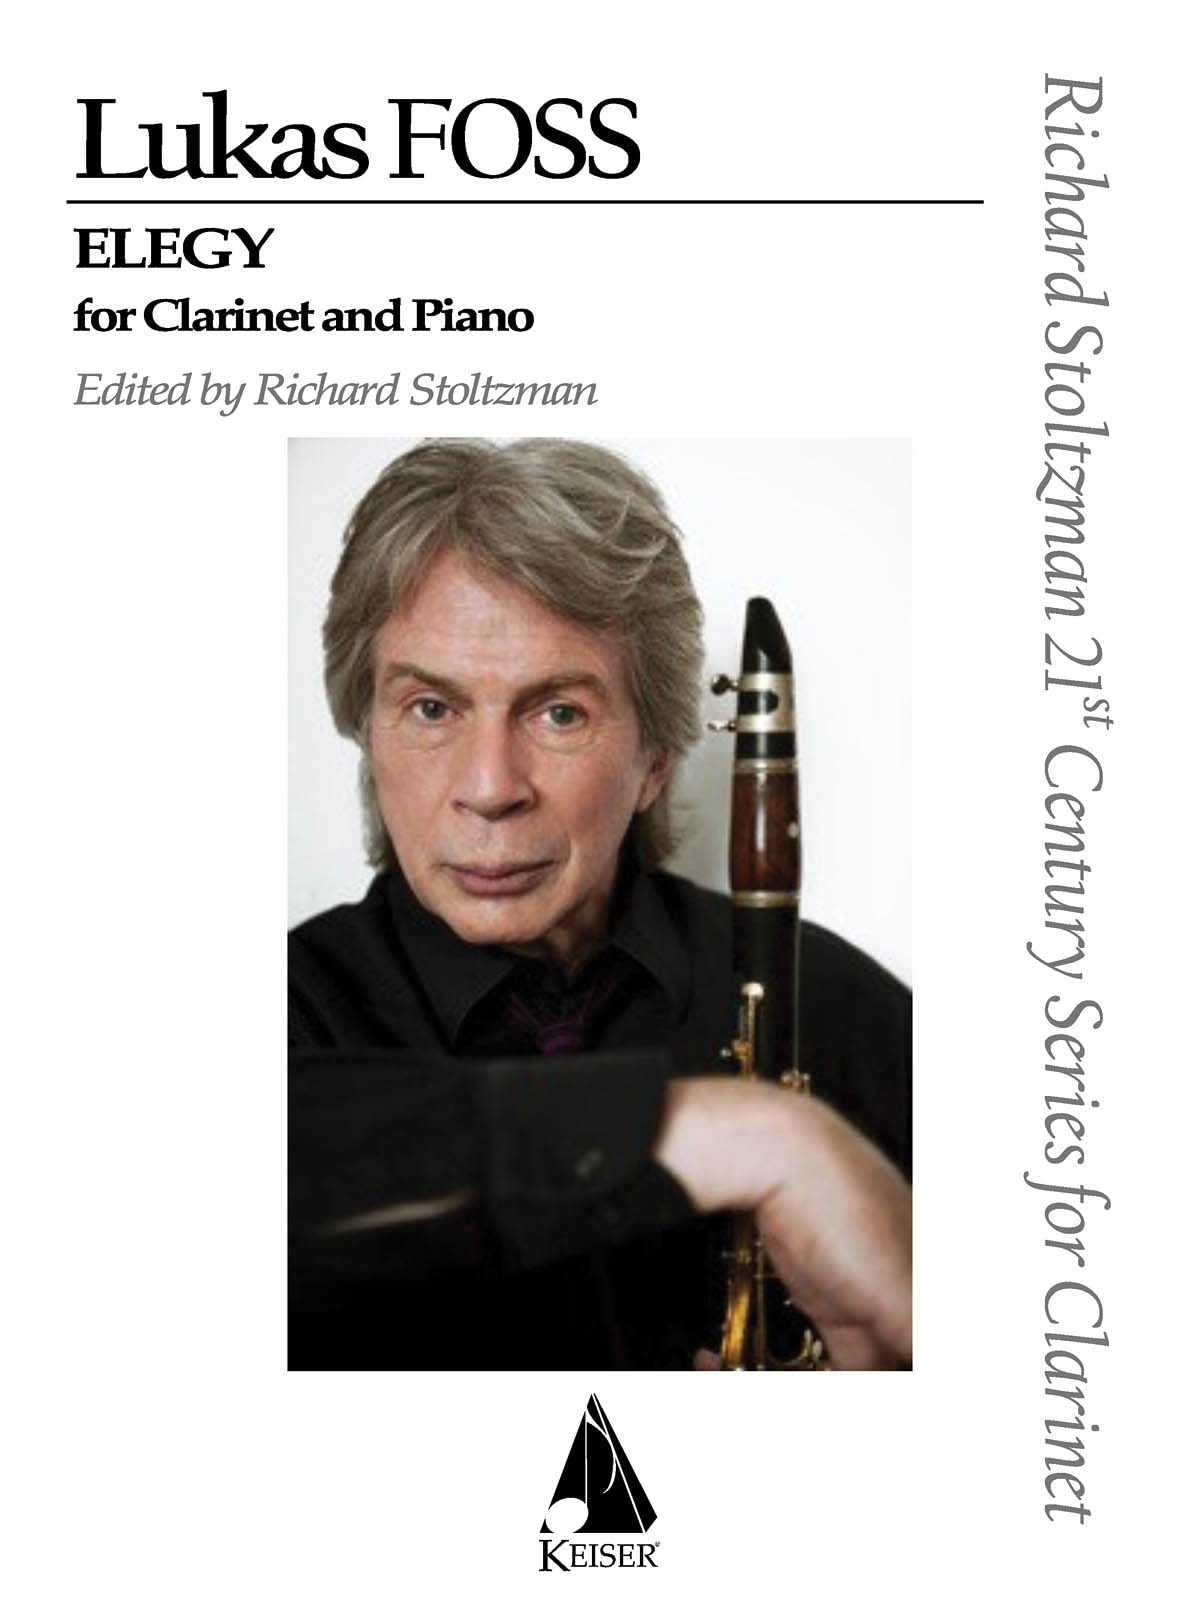 Elegy for Clarinet and Orchestra - Clarinet and Orchestra - Klavierauszug